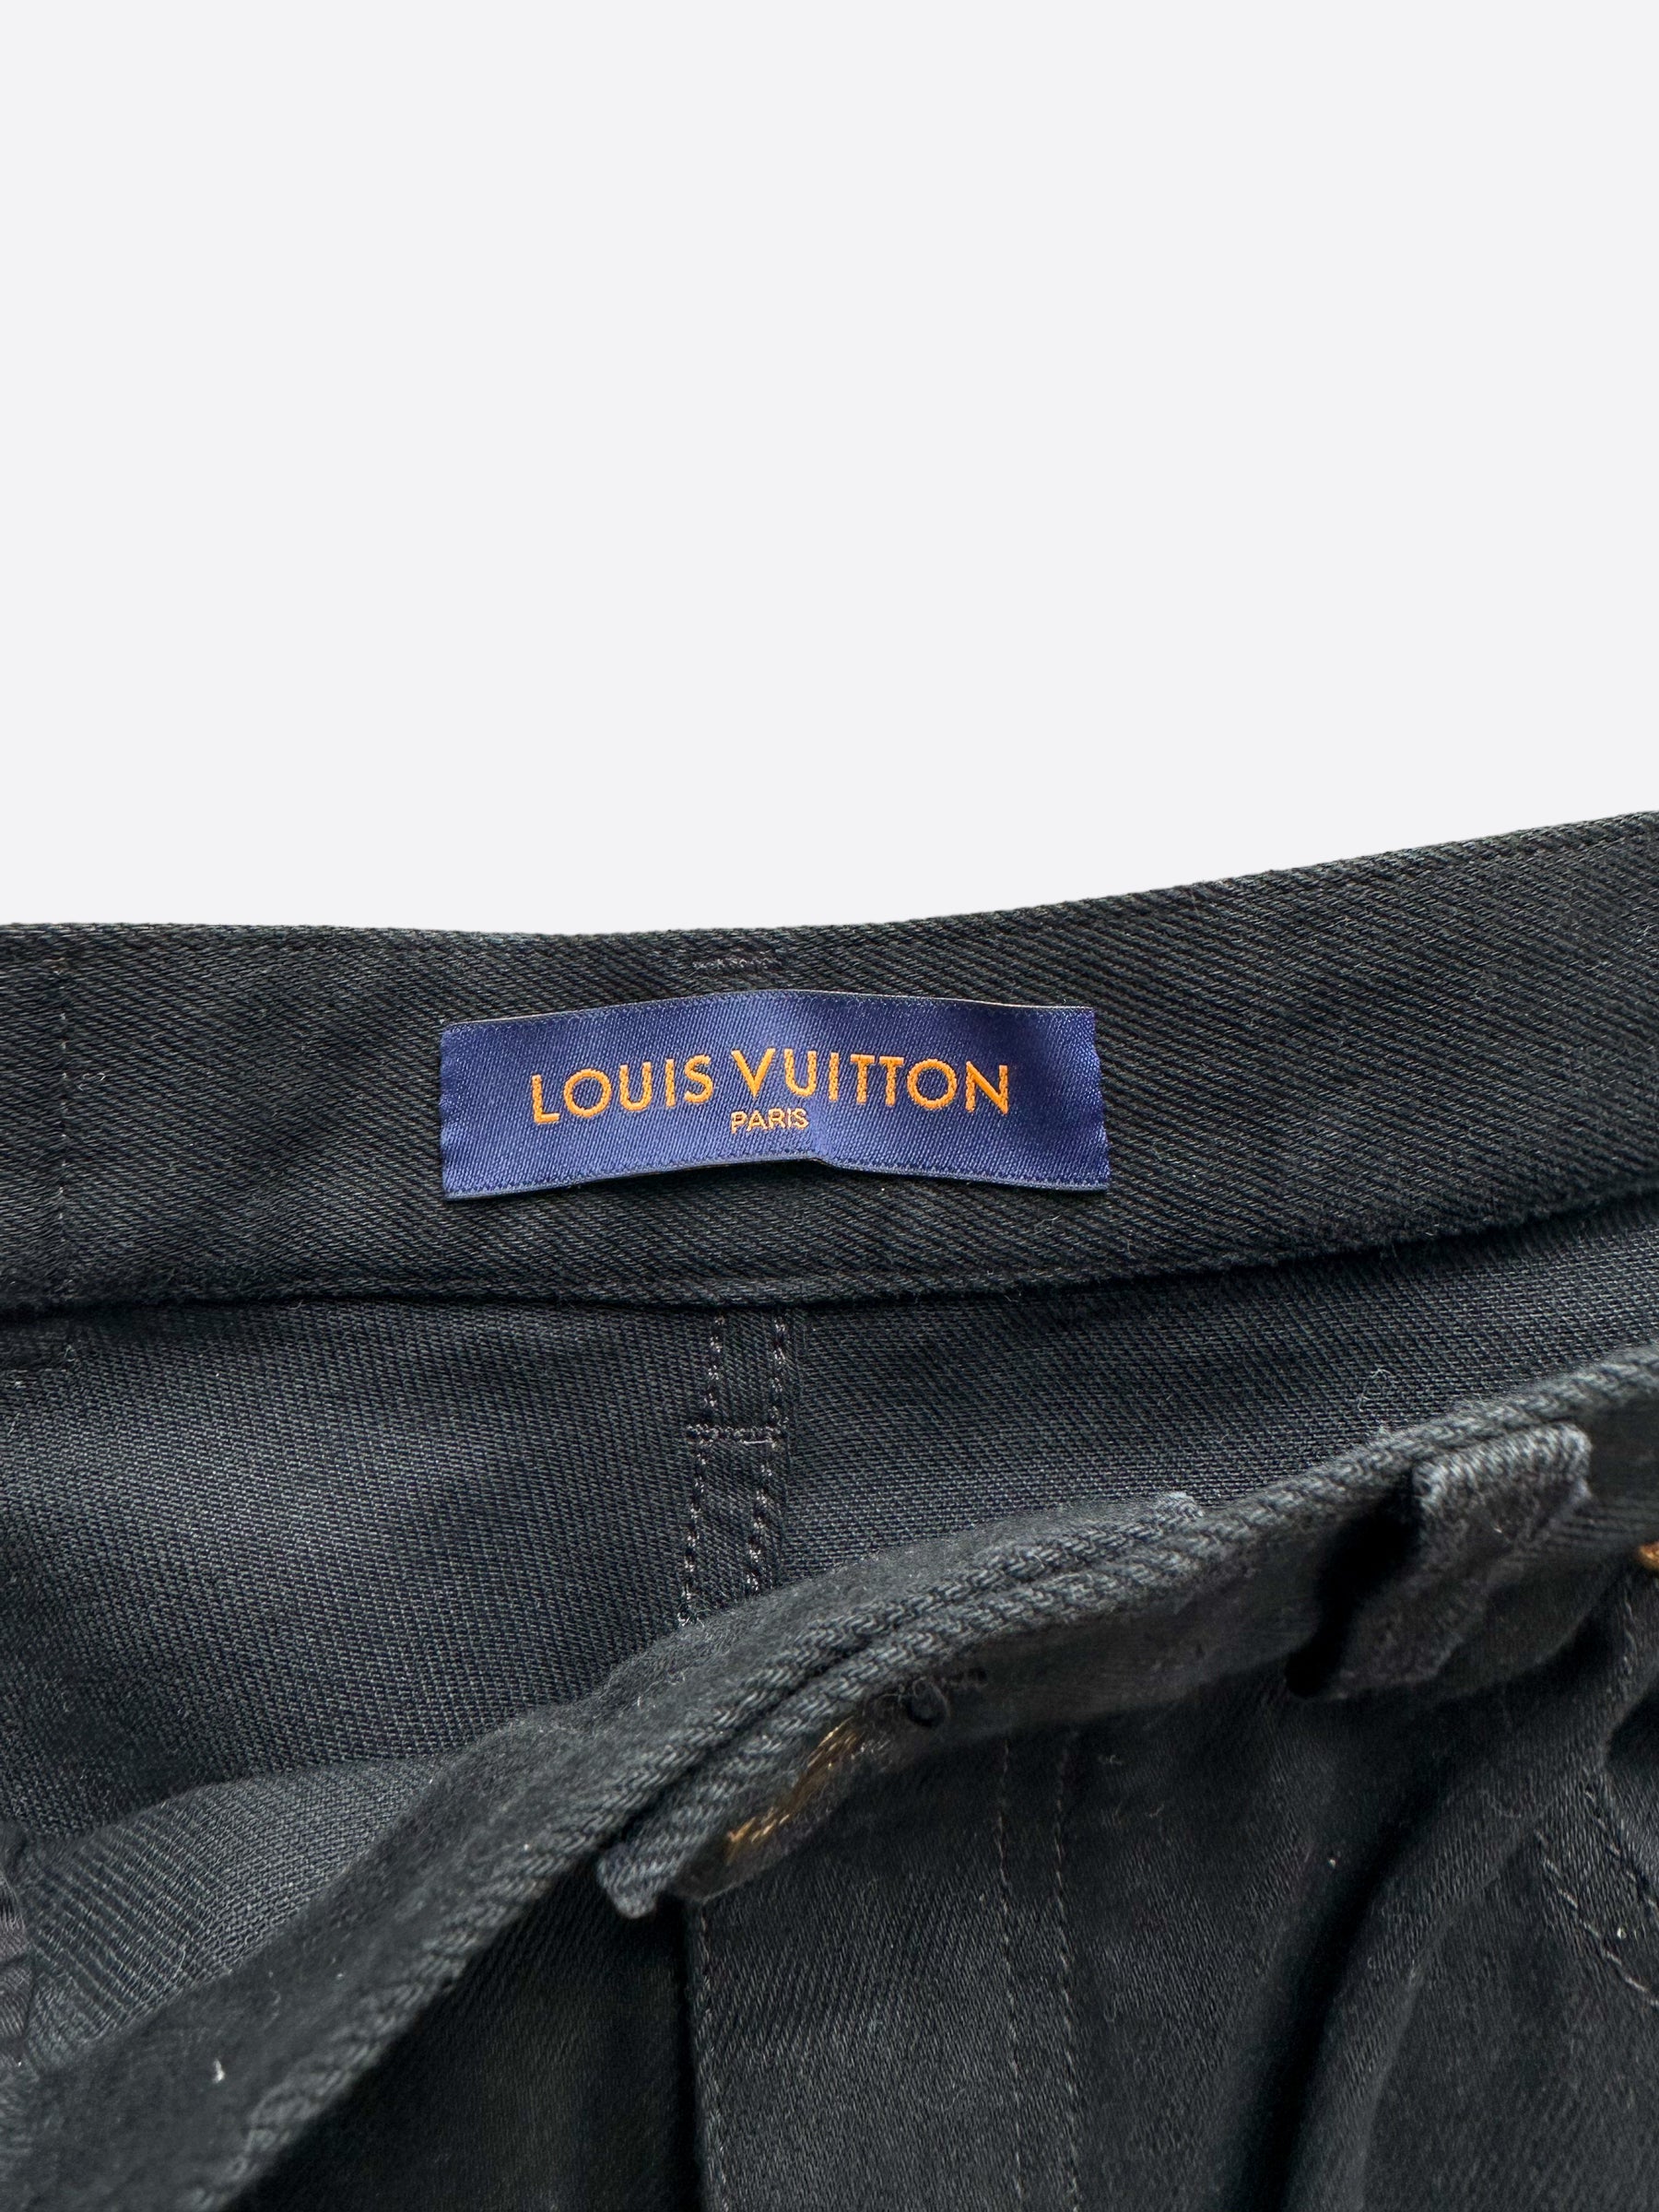 louis vuitton jeans with logo